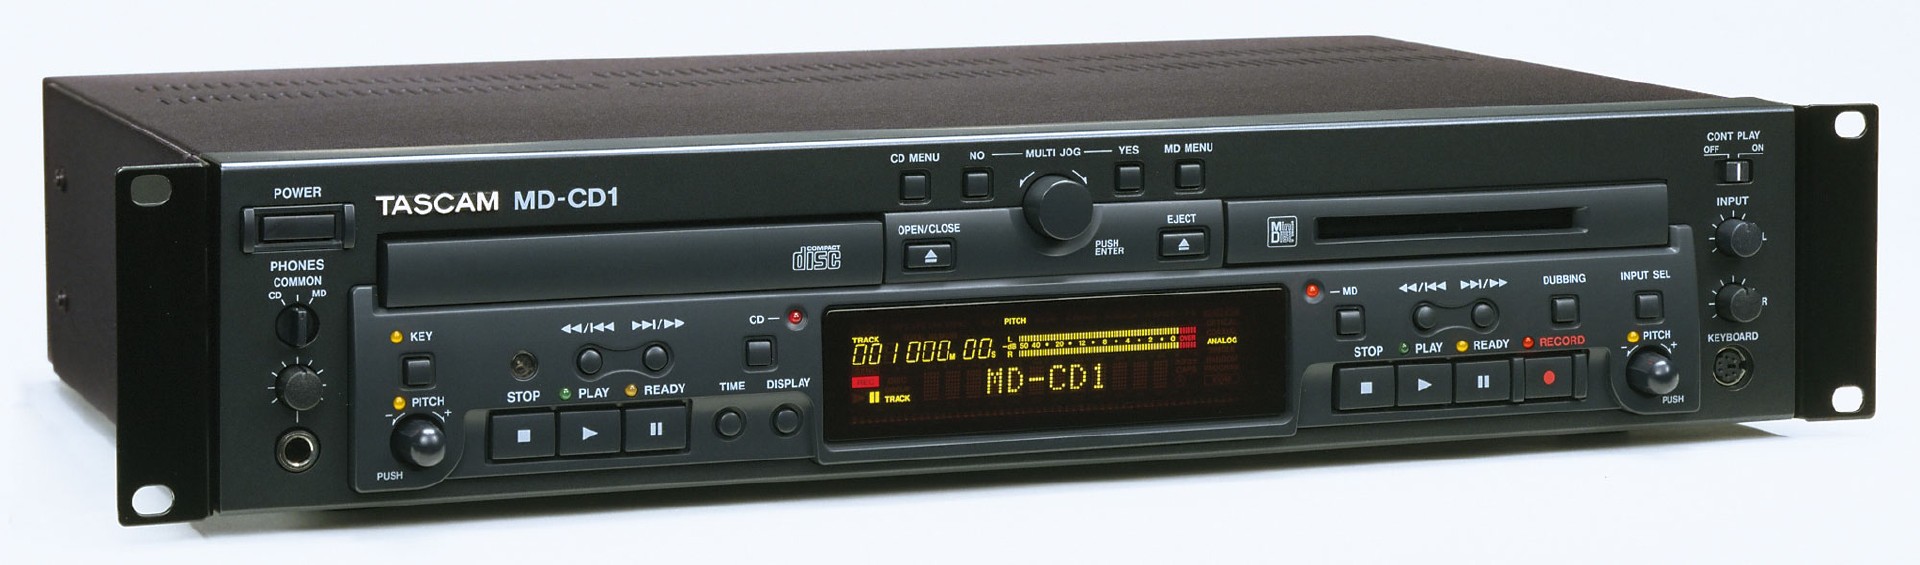 MD-CD1 | FEATURES | TASCAM - United States